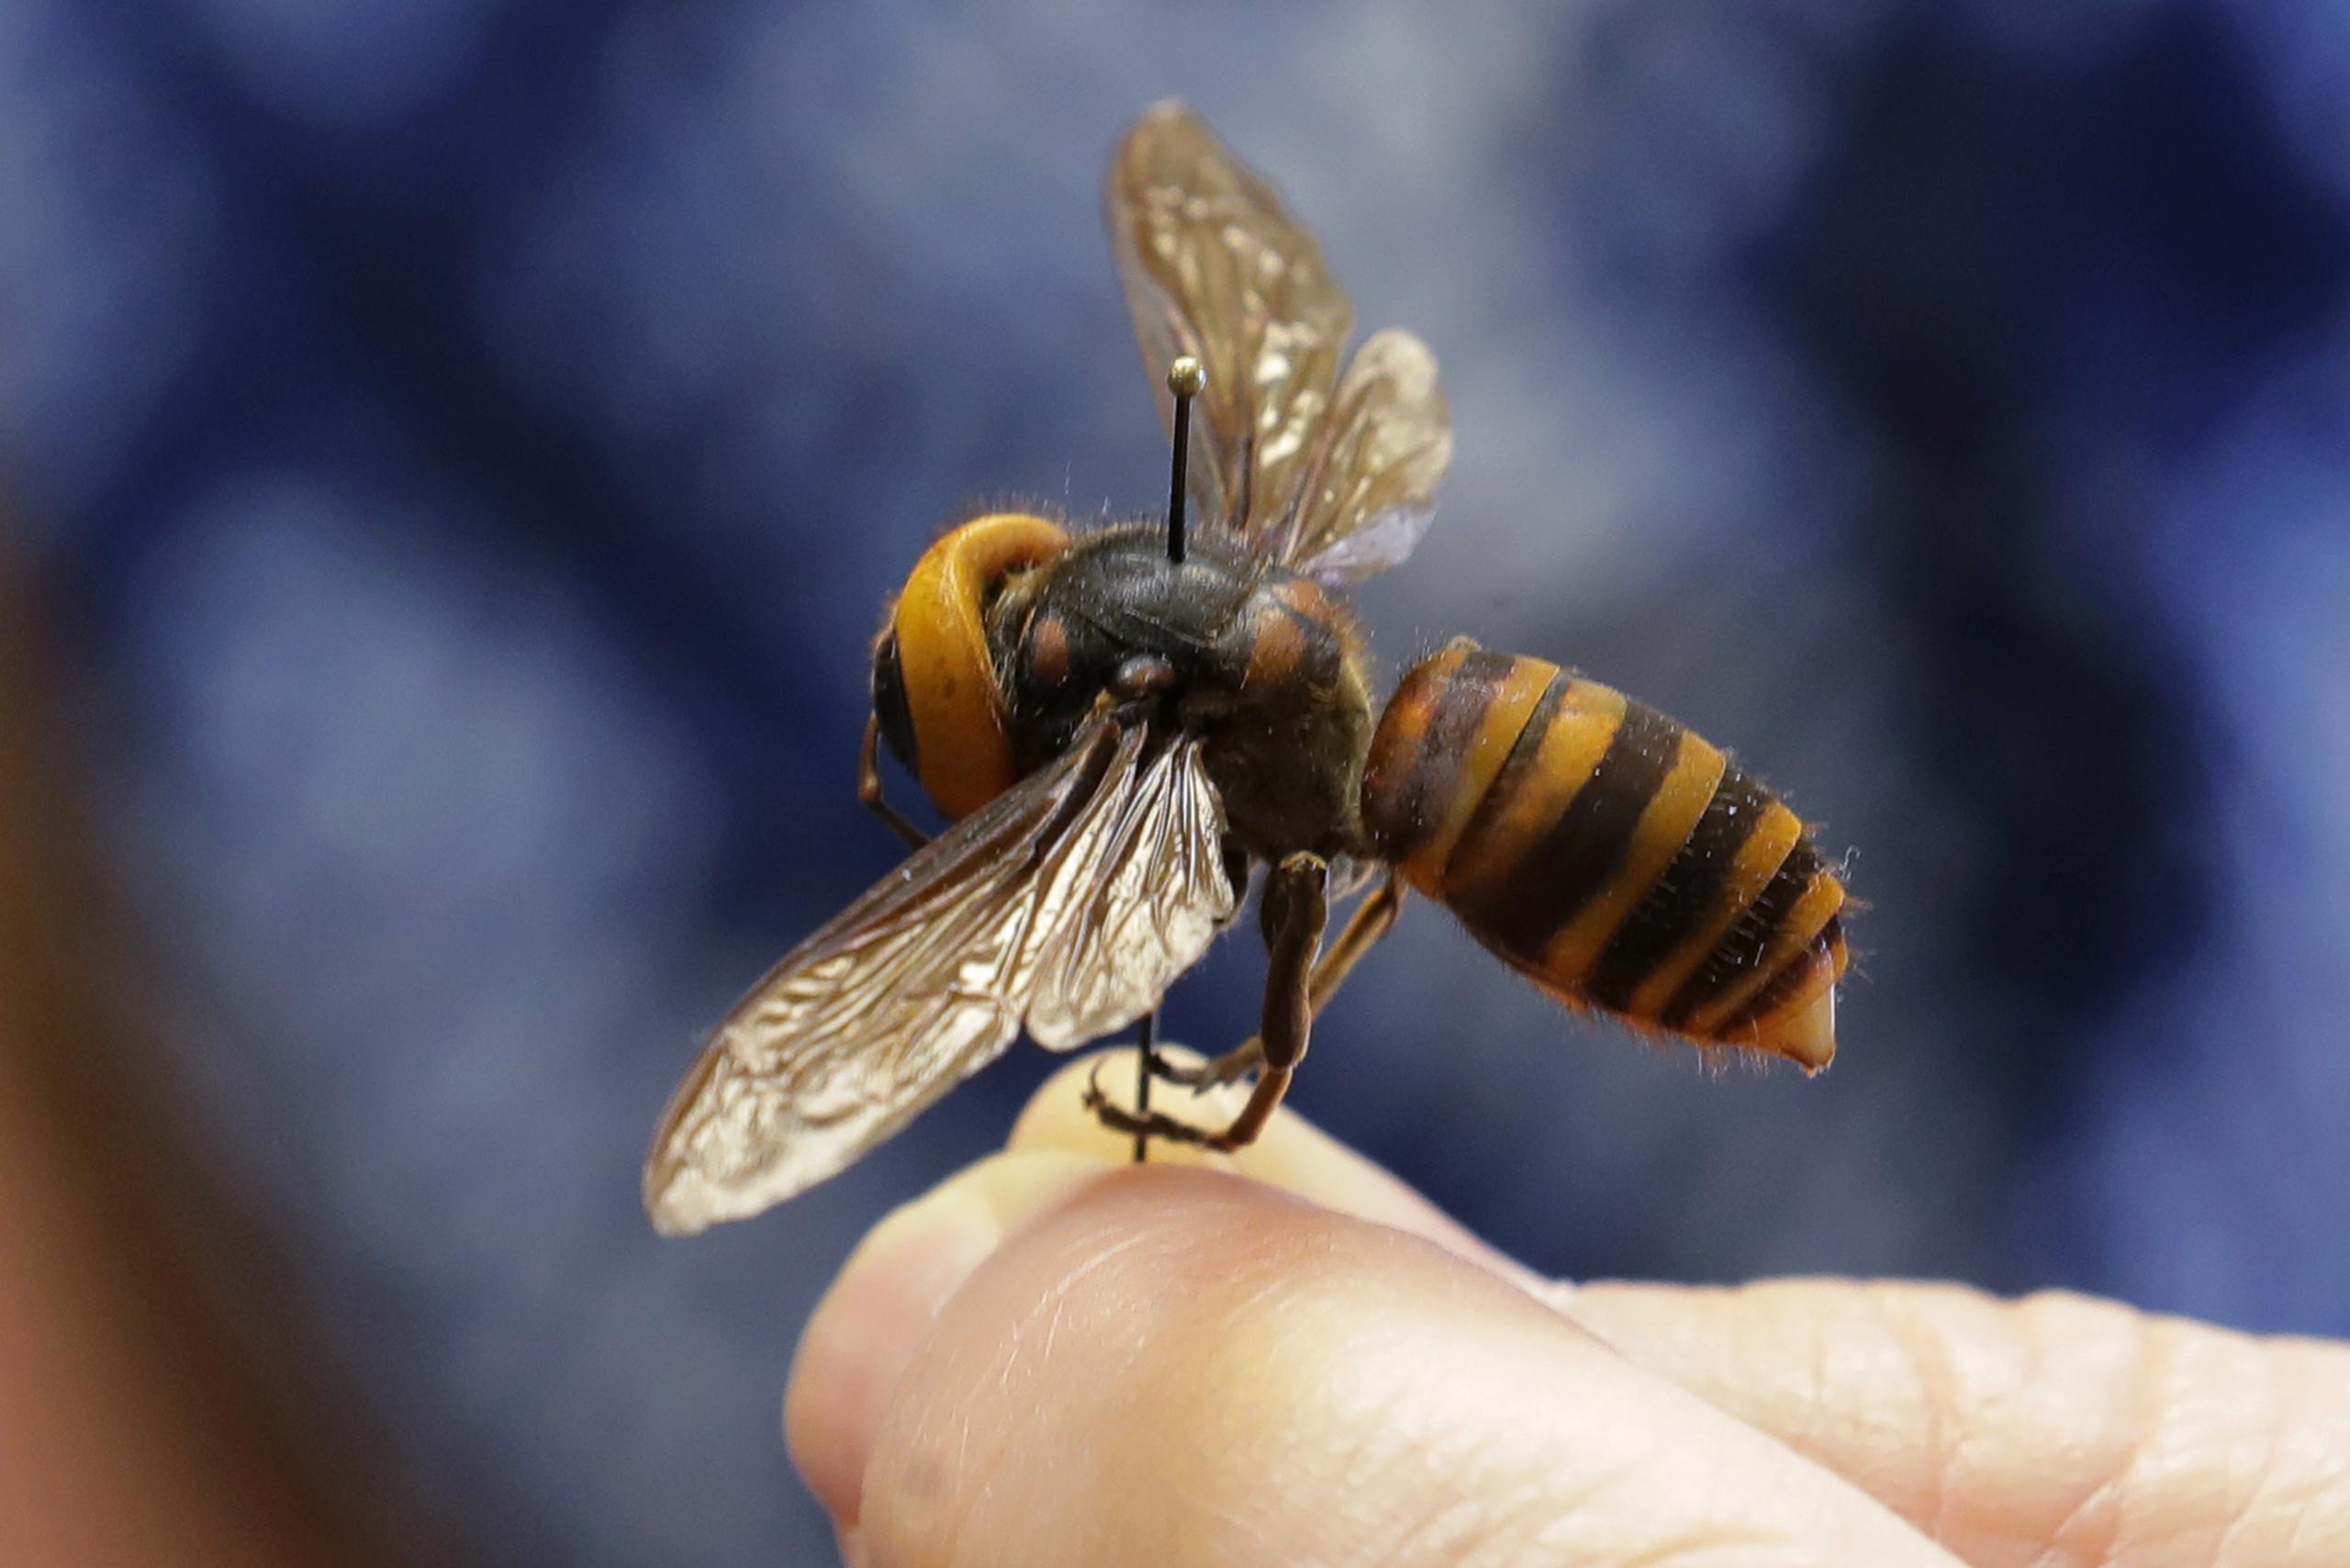 A dead Asian giant hornet sent from Japan is held on a pin by Sven Spichiger, an entomologist with the Washington State Department of Agriculture, Monday, May 4, 2020, in Olympia, Wash. The insect, which has been found in Washington state, is the world's largest hornet, and has been dubbed the "Murder Hornet" in reference to its appetite for honey bees, and a sting that can be fatal to some people. (AP Photo/Ted S. Warren)